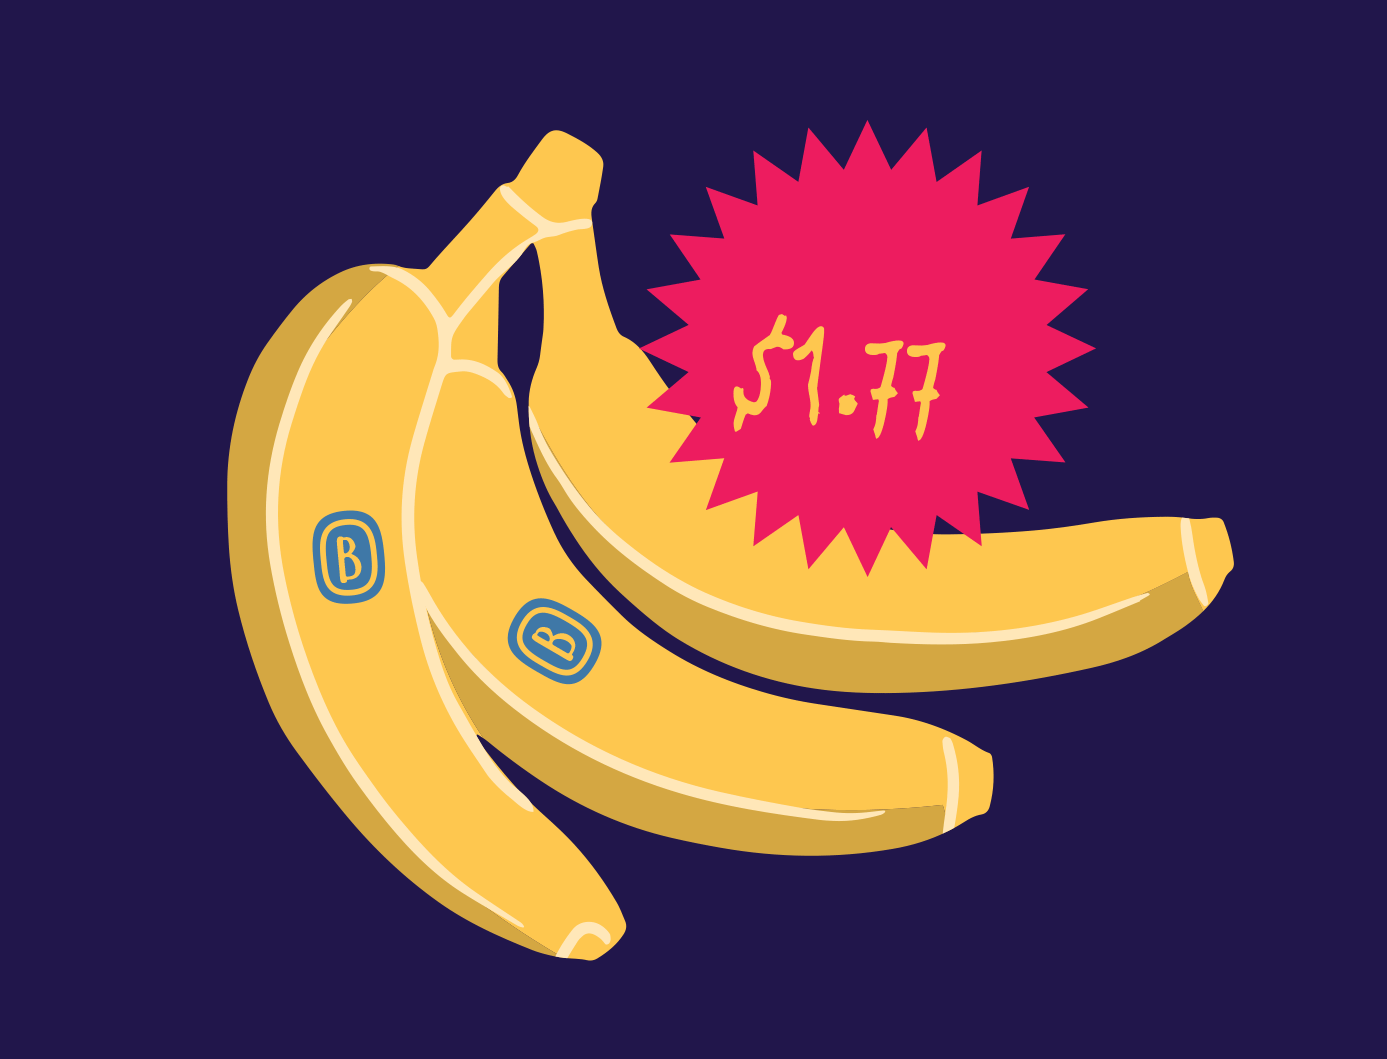 An animated illustration in which the pricetag on bananas changes from $1.77 to $1.89